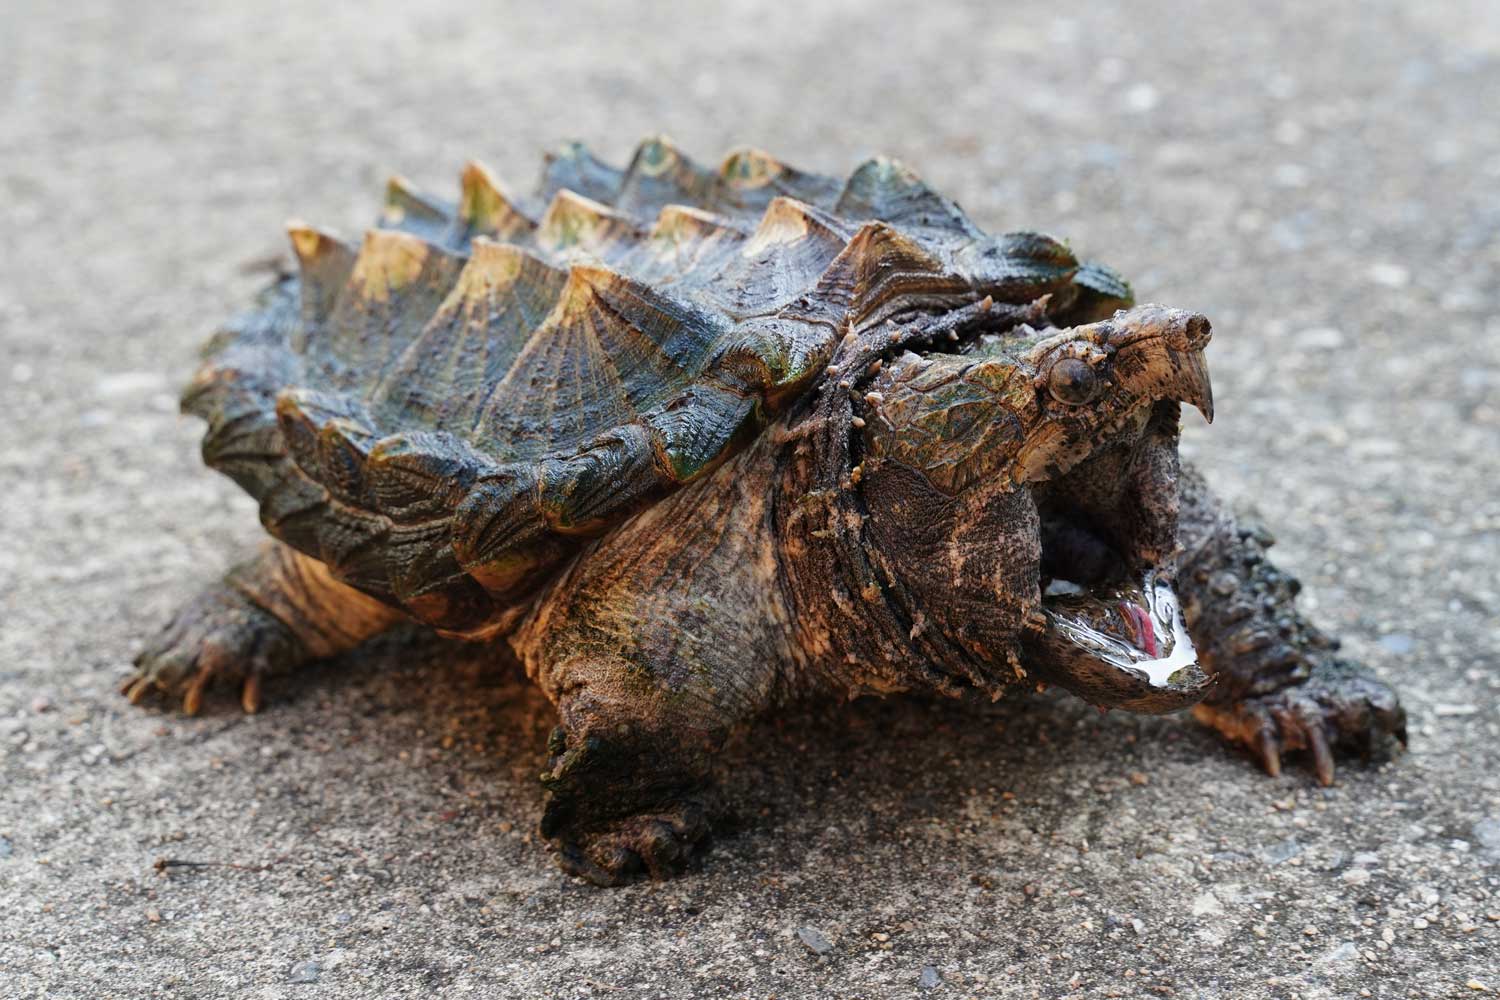 Alligator snapping turtle standing with its mouth open.